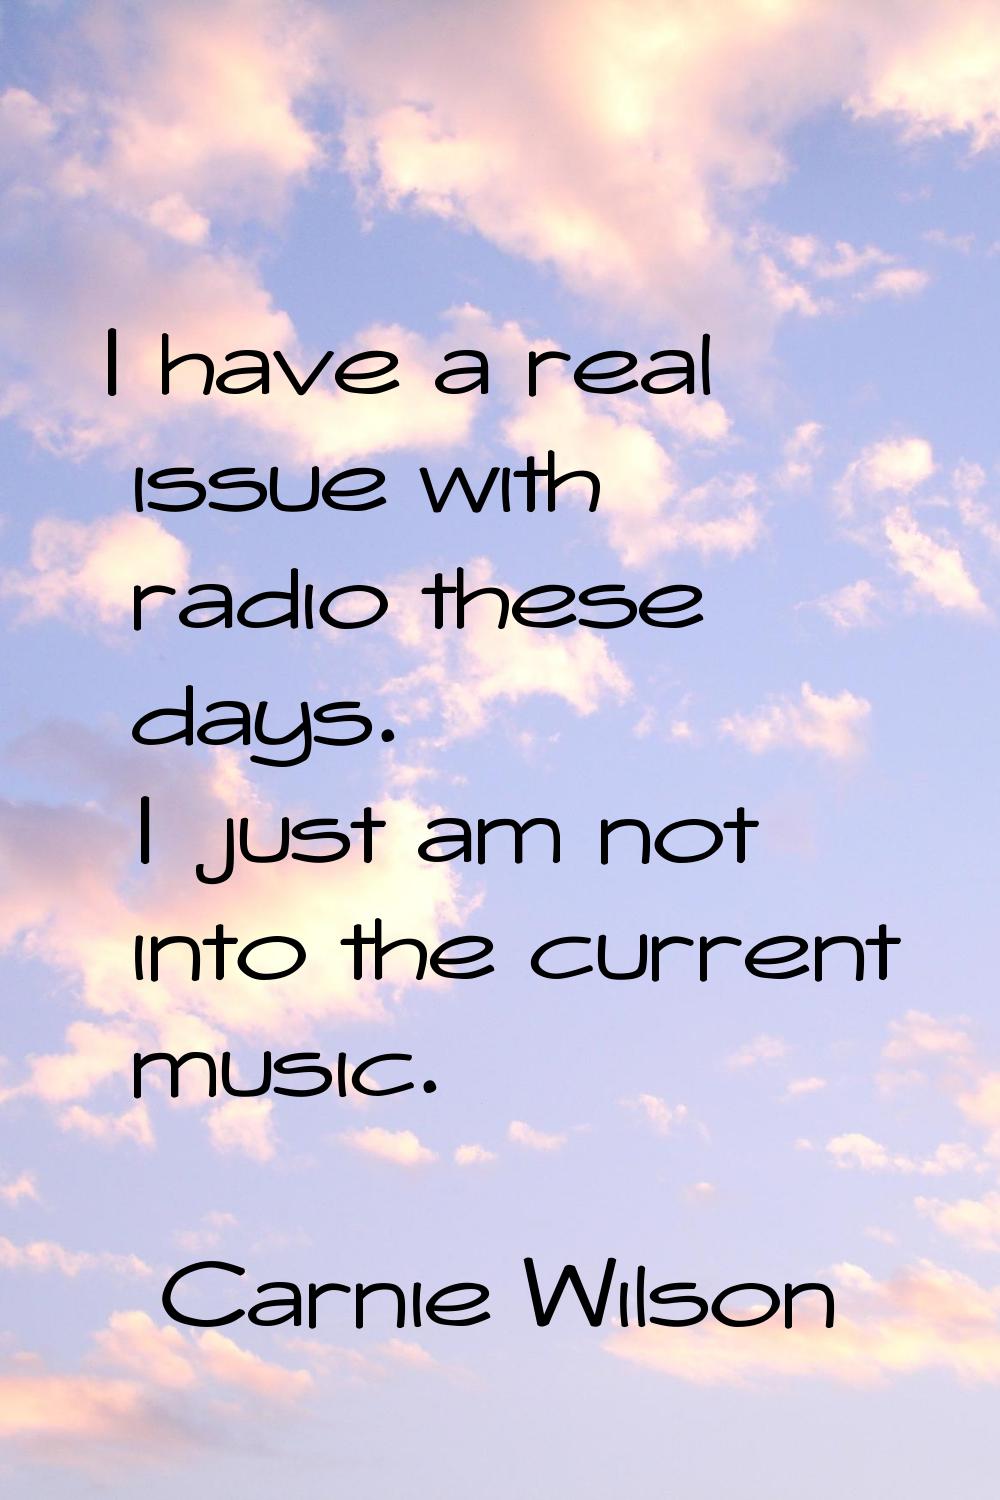 I have a real issue with radio these days. I just am not into the current music.